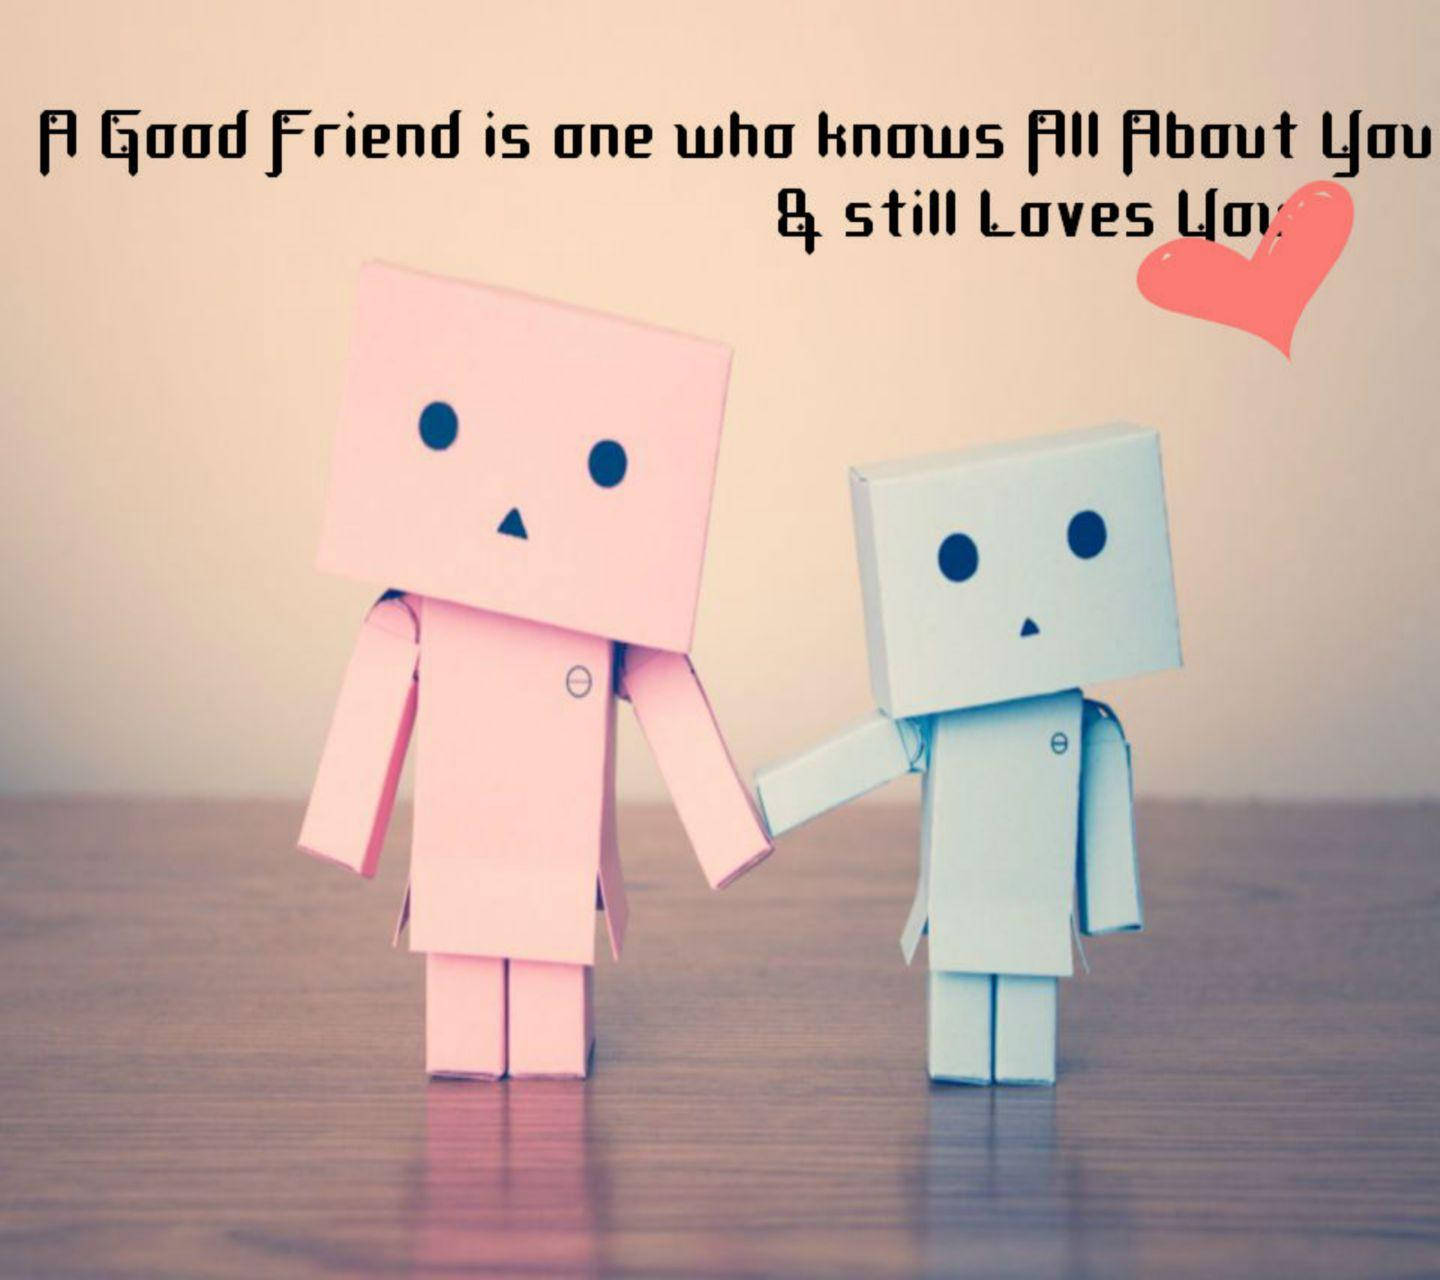 Download Friendship Of Two Cute Cardboard Toys Wallpaper 